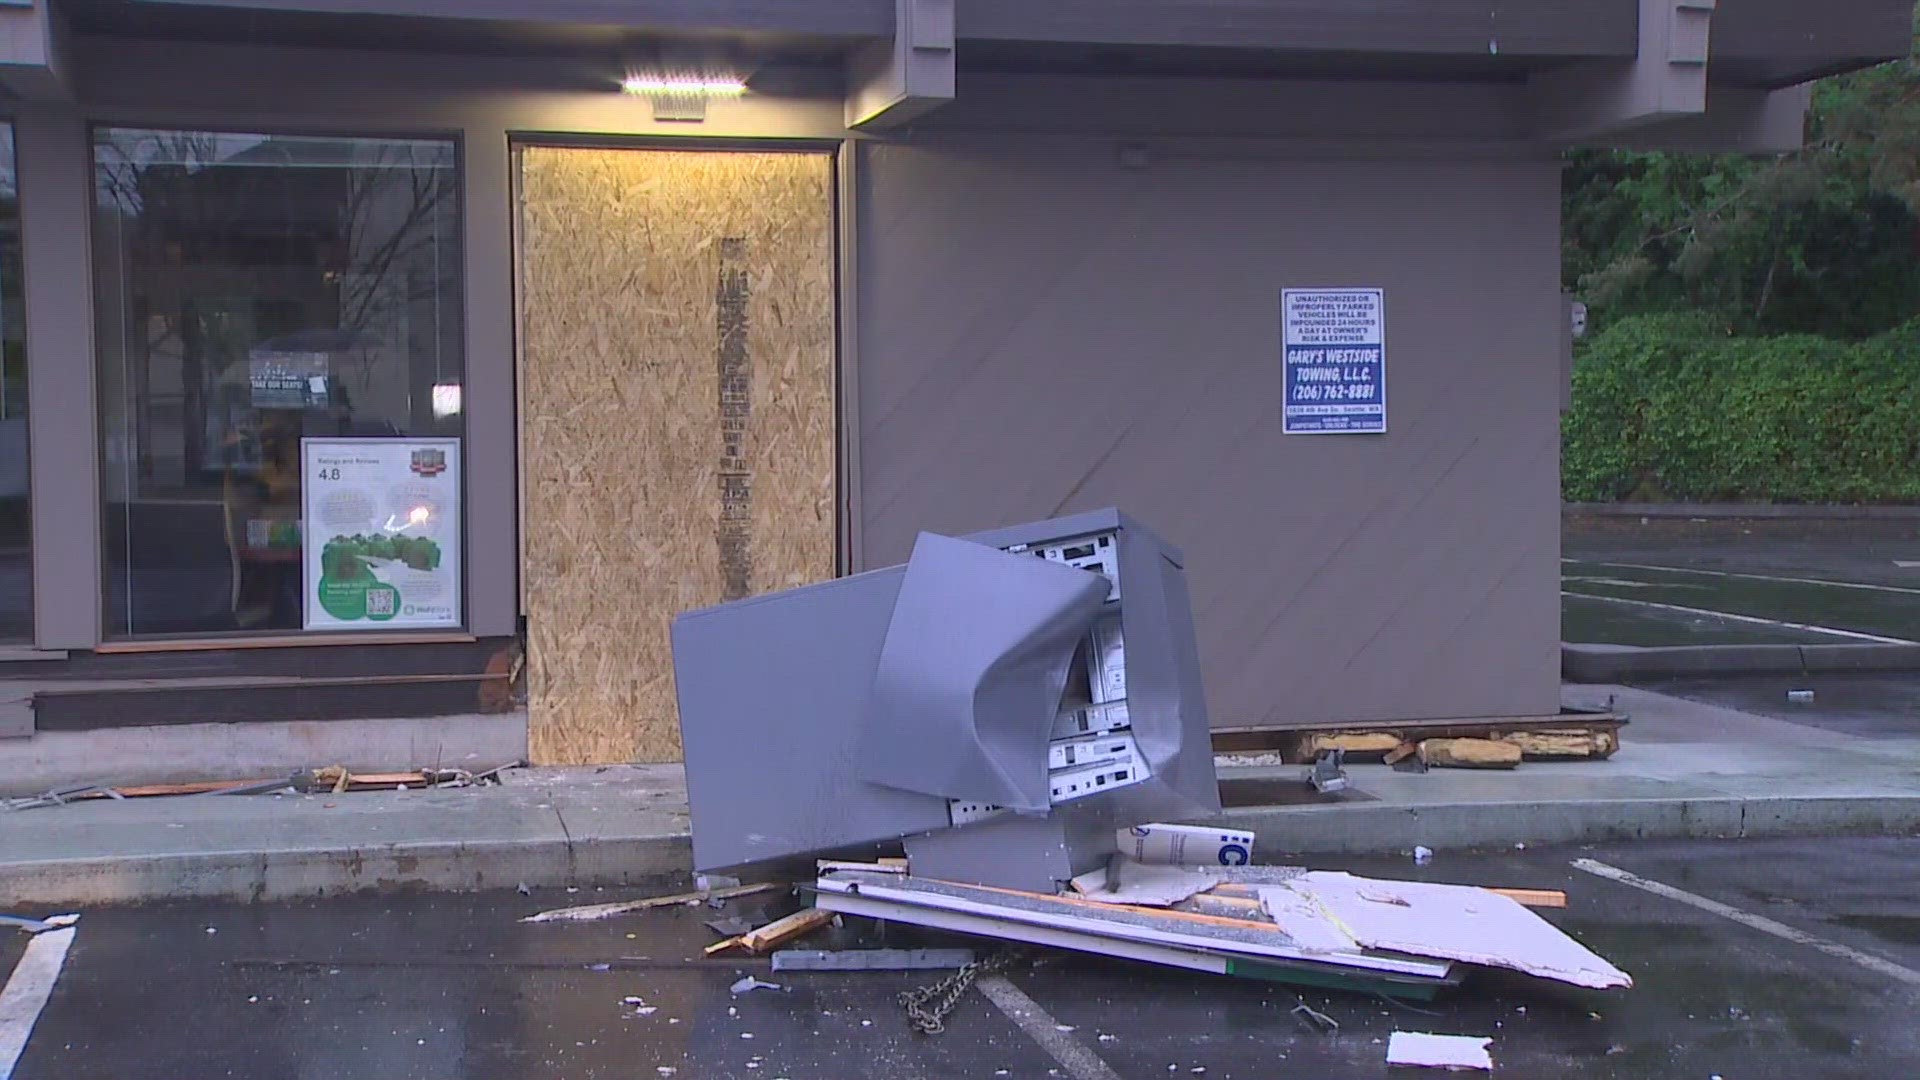 The Washington Federal Bank in south Seattle was the target of thieves.